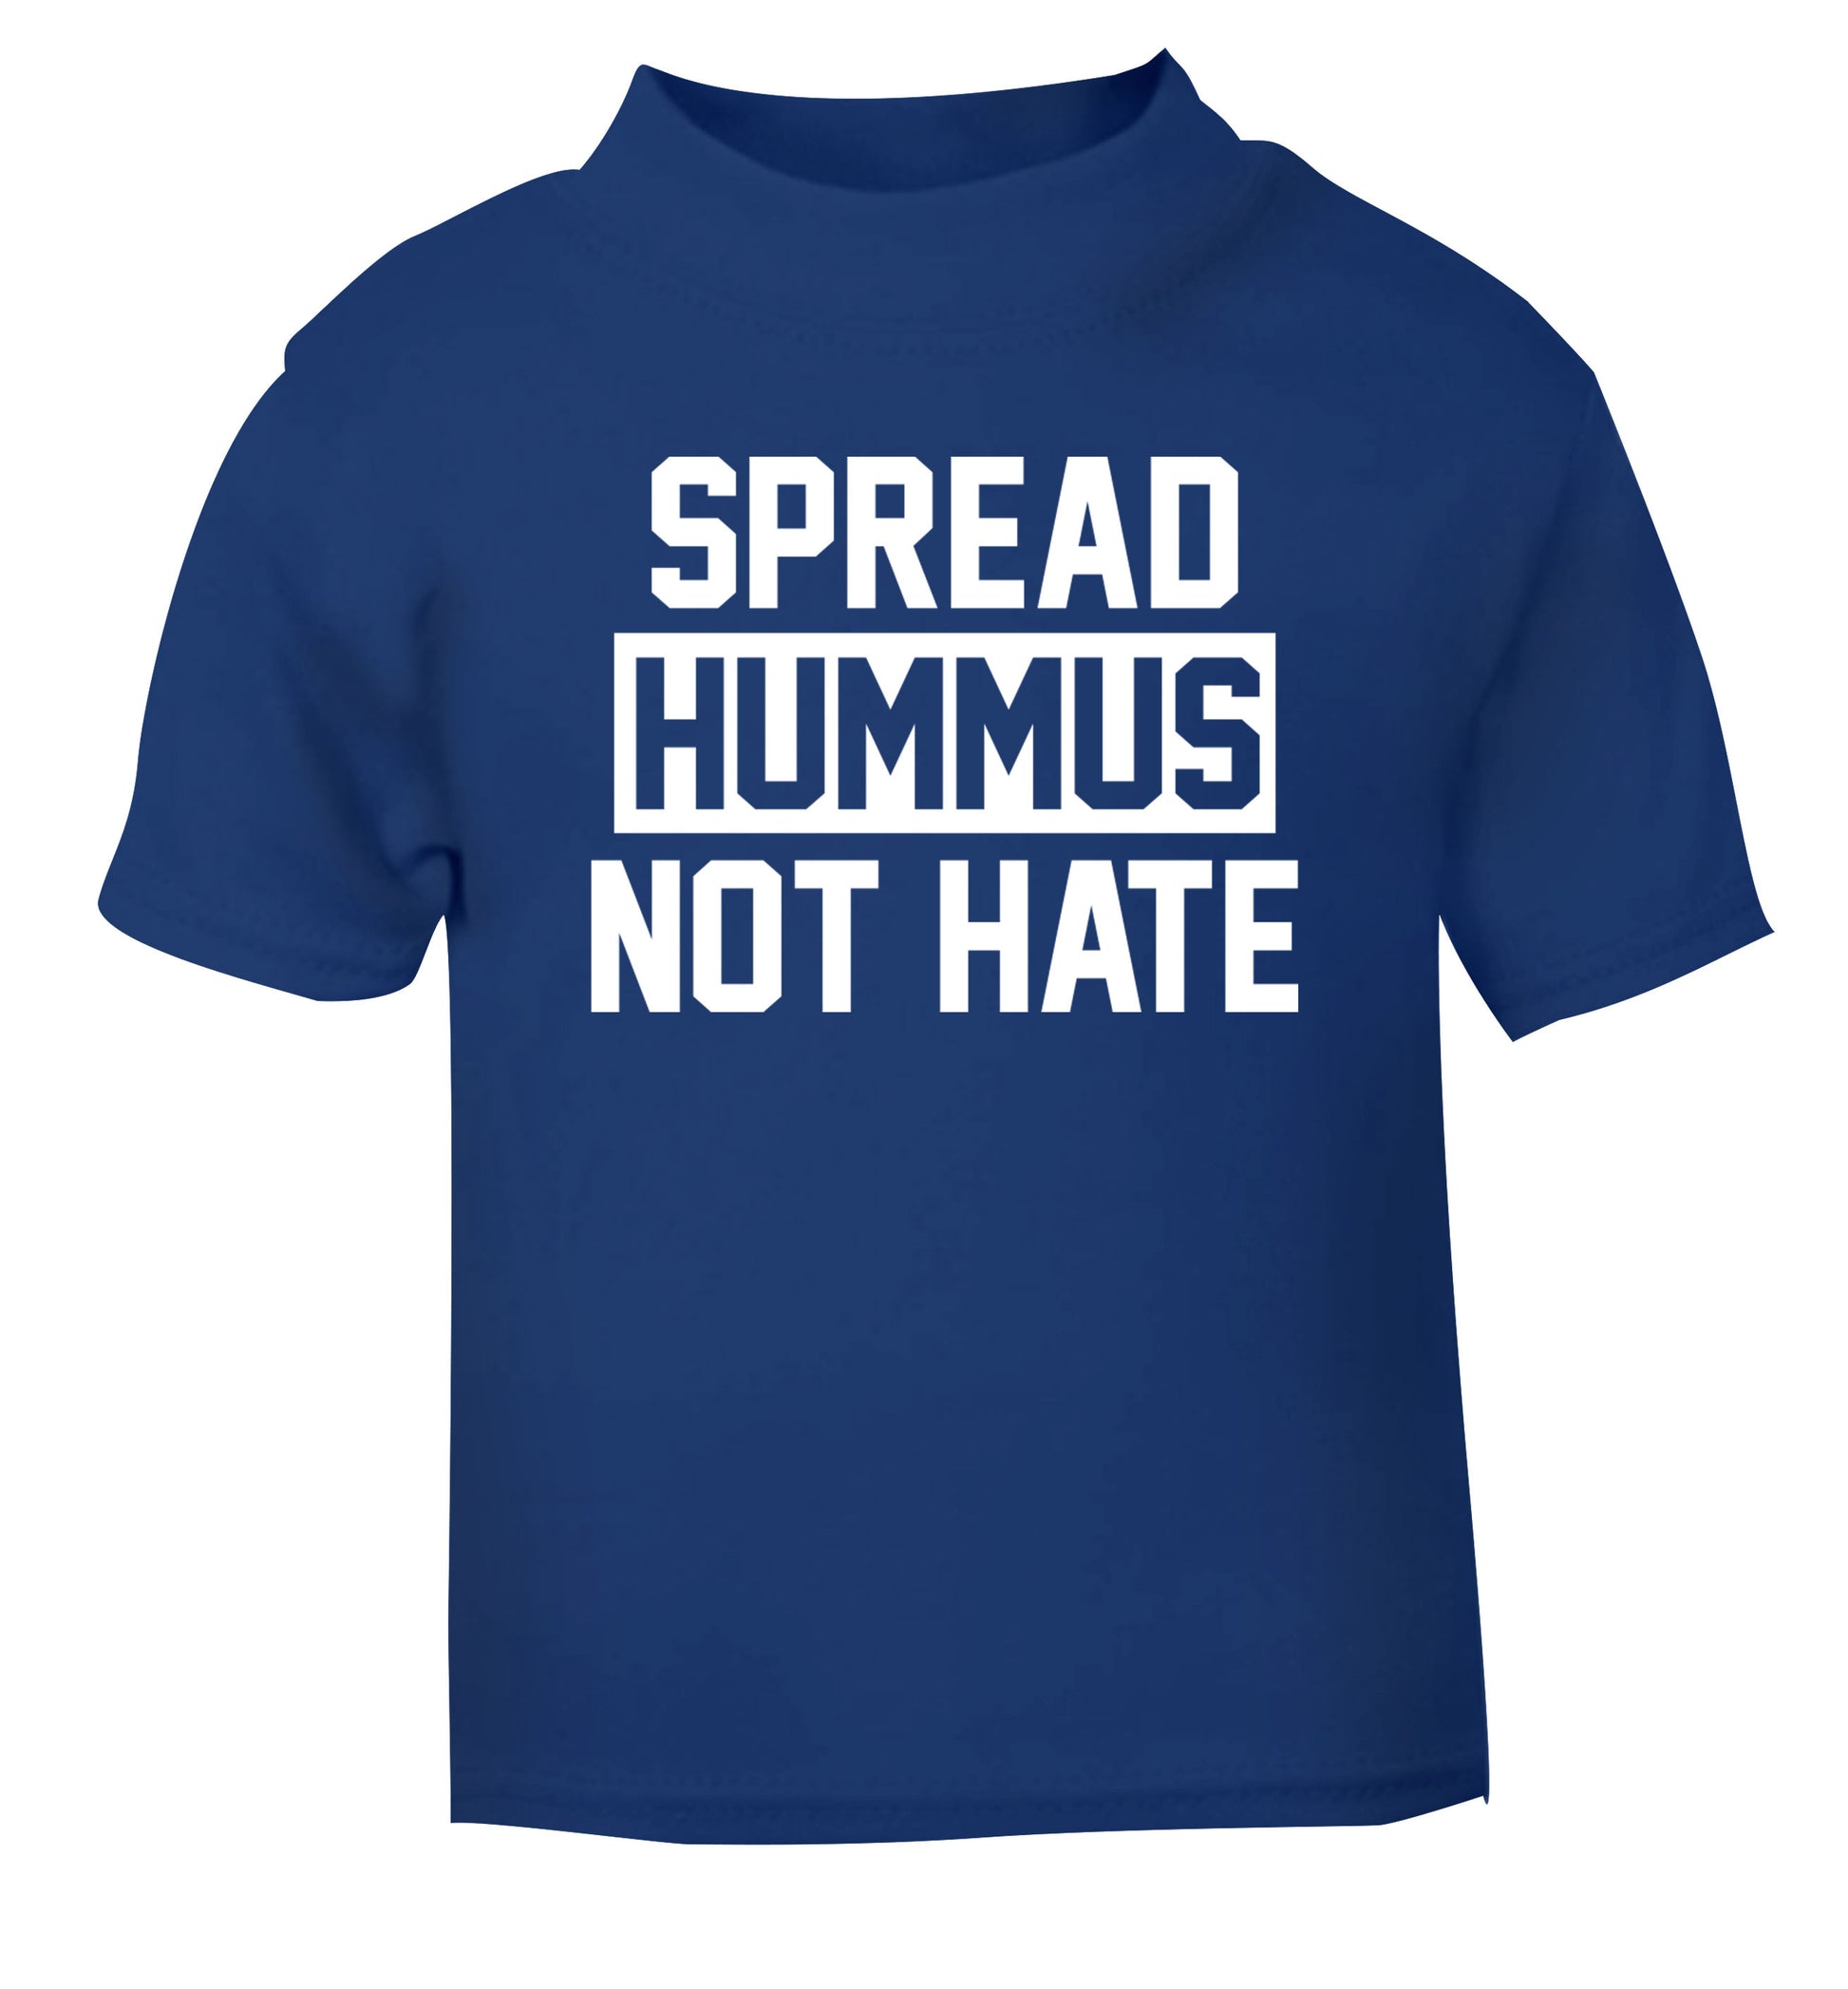 Spread hummus not hate blue Baby Toddler Tshirt 2 Years